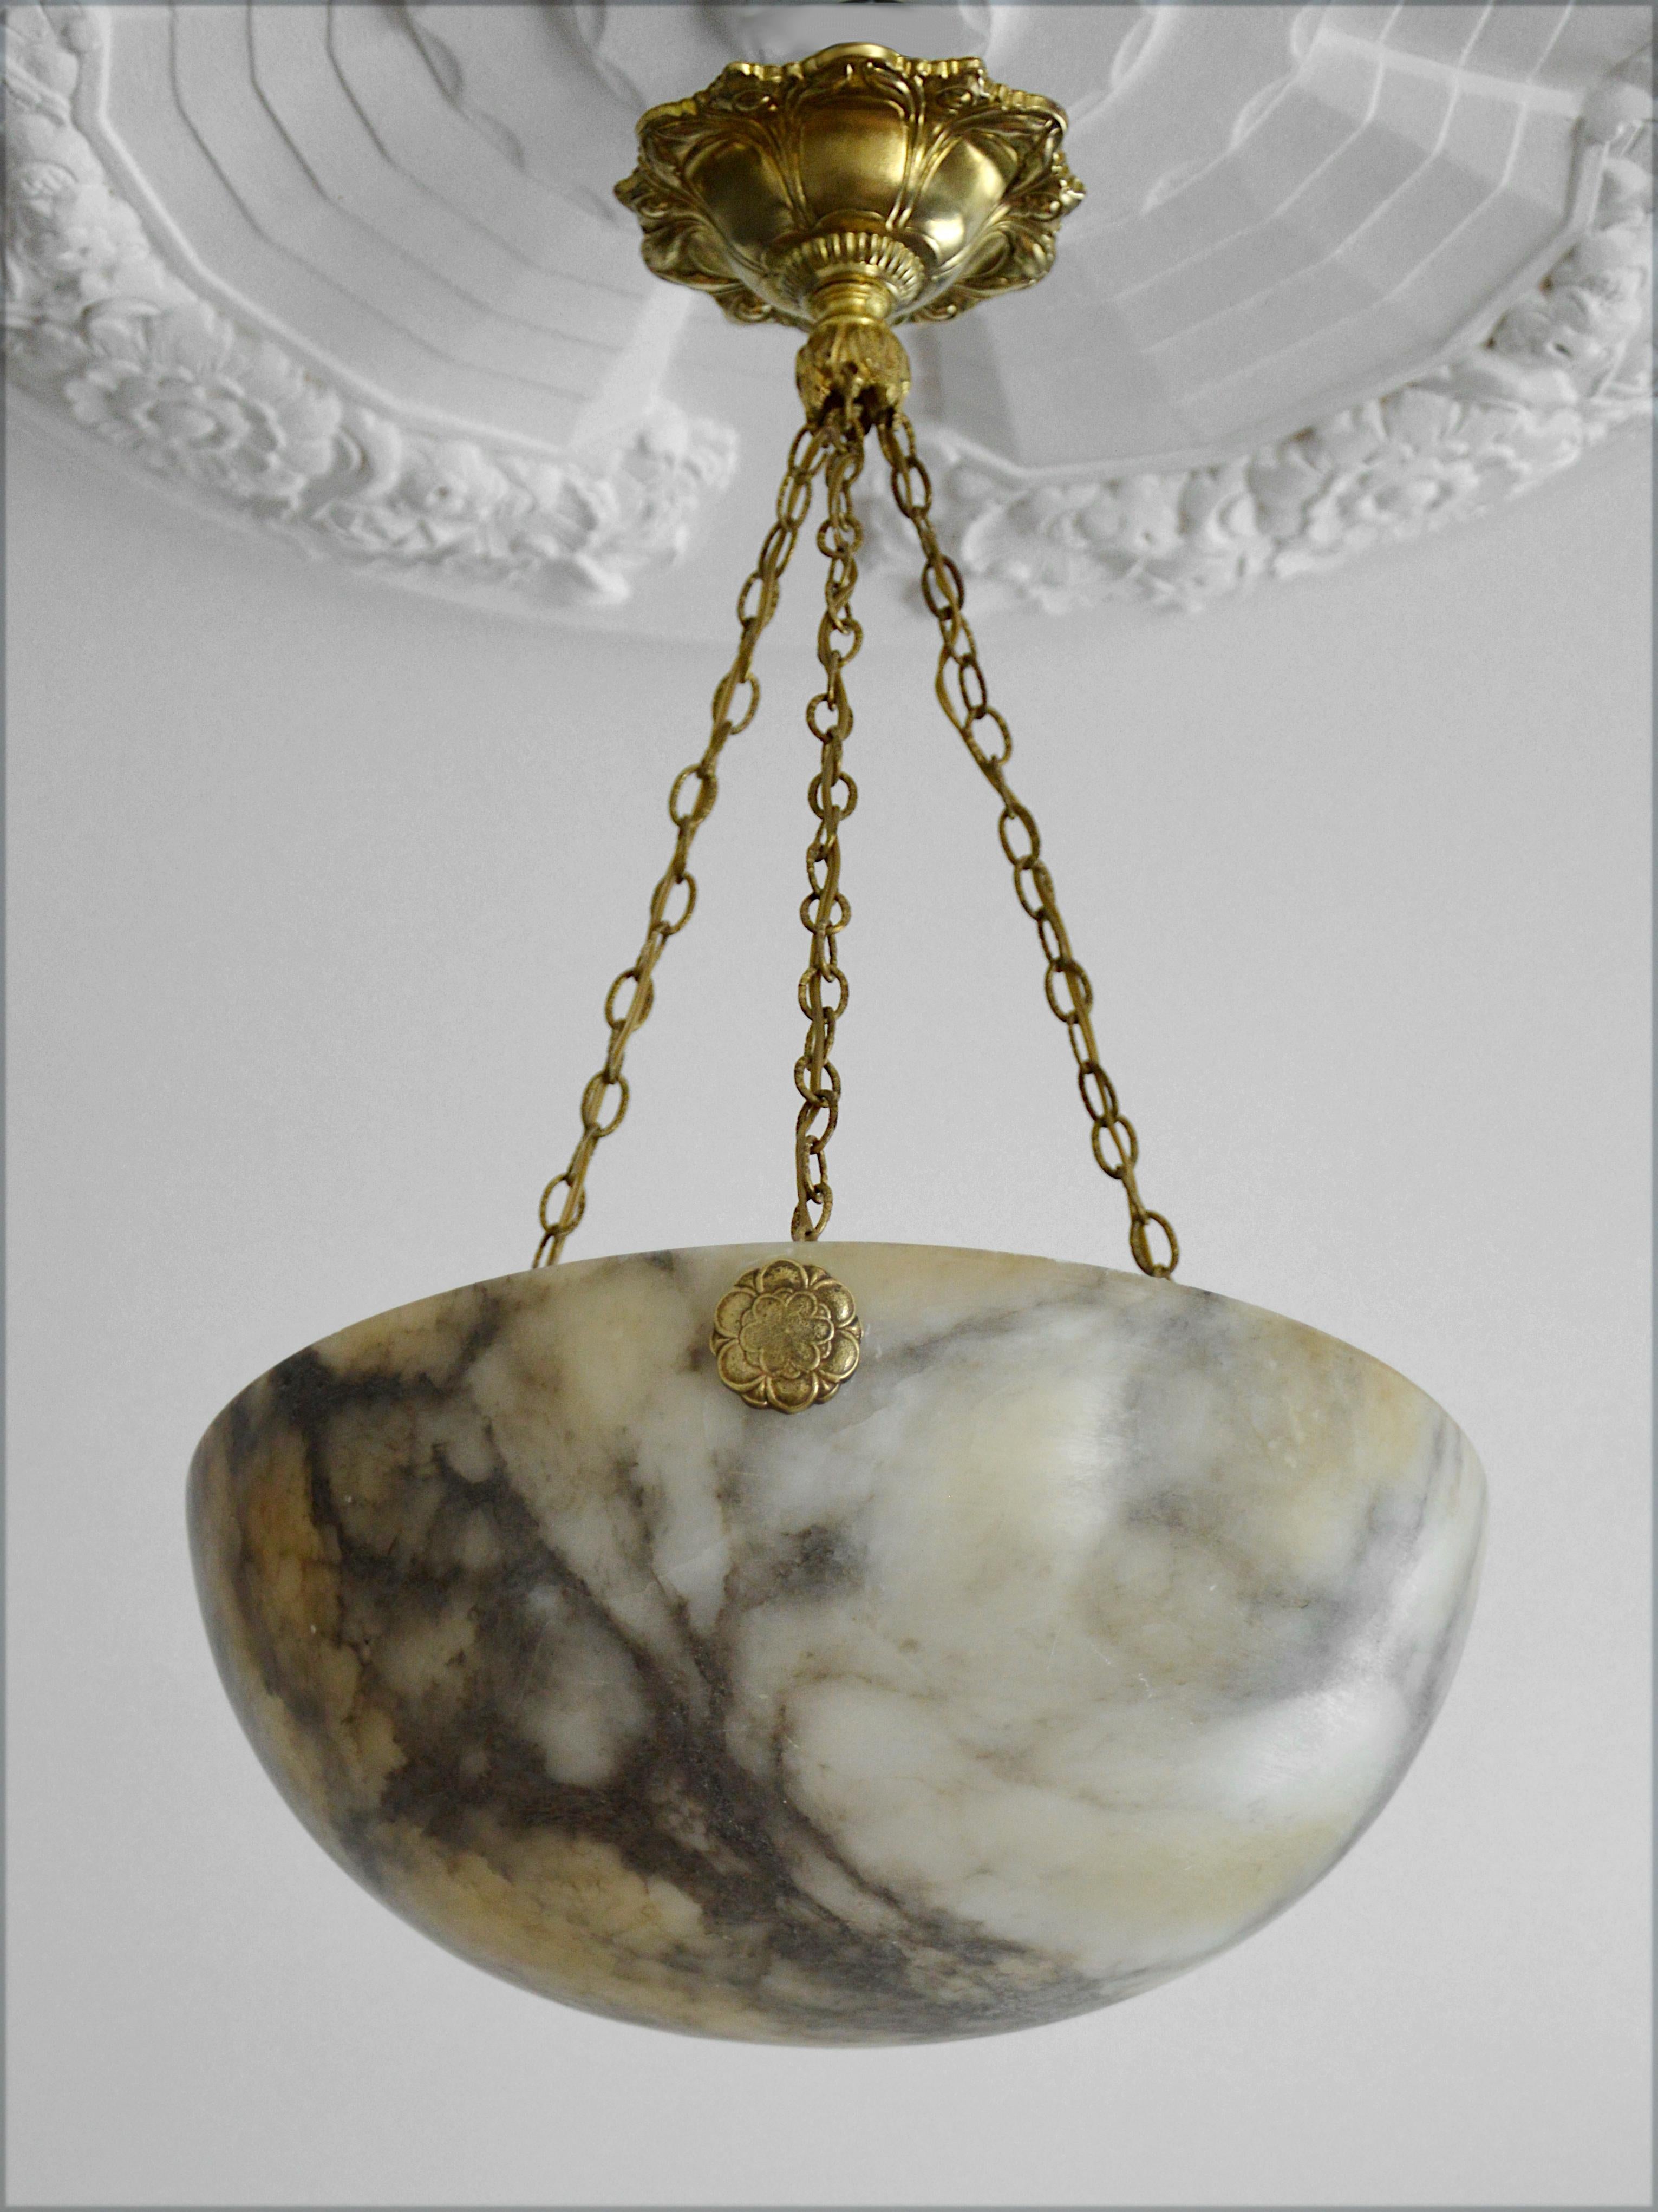 French Art Deco alabaster pendant chandelier, France, circa 1925. Alabaster, brass and bronze. Alabaster shade hung on its brass (canopy and chains) and bronze (hidden-holes) fixture. Old alabaster cannot be compared to new ones. Old alabaster has